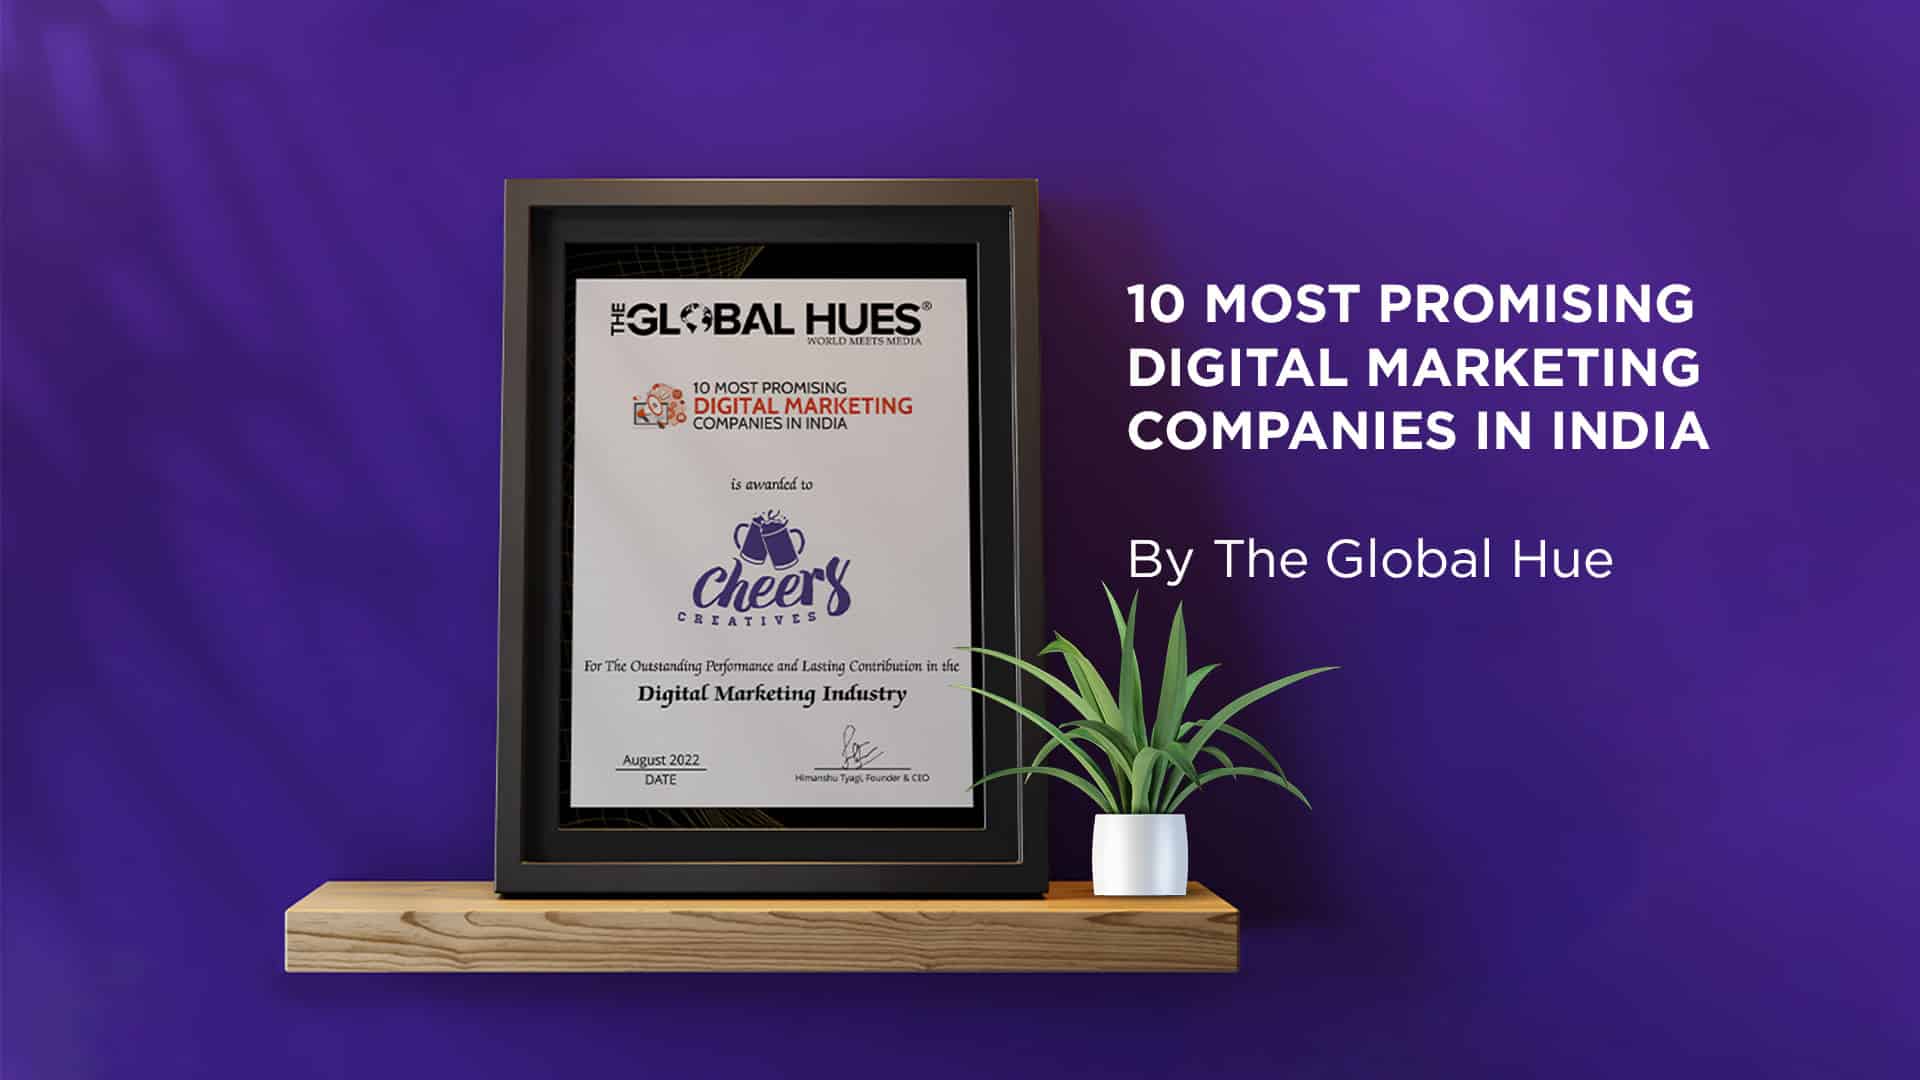 Cheers Creatives Features Under 10 Most Promising Digital Marketing Companies in India